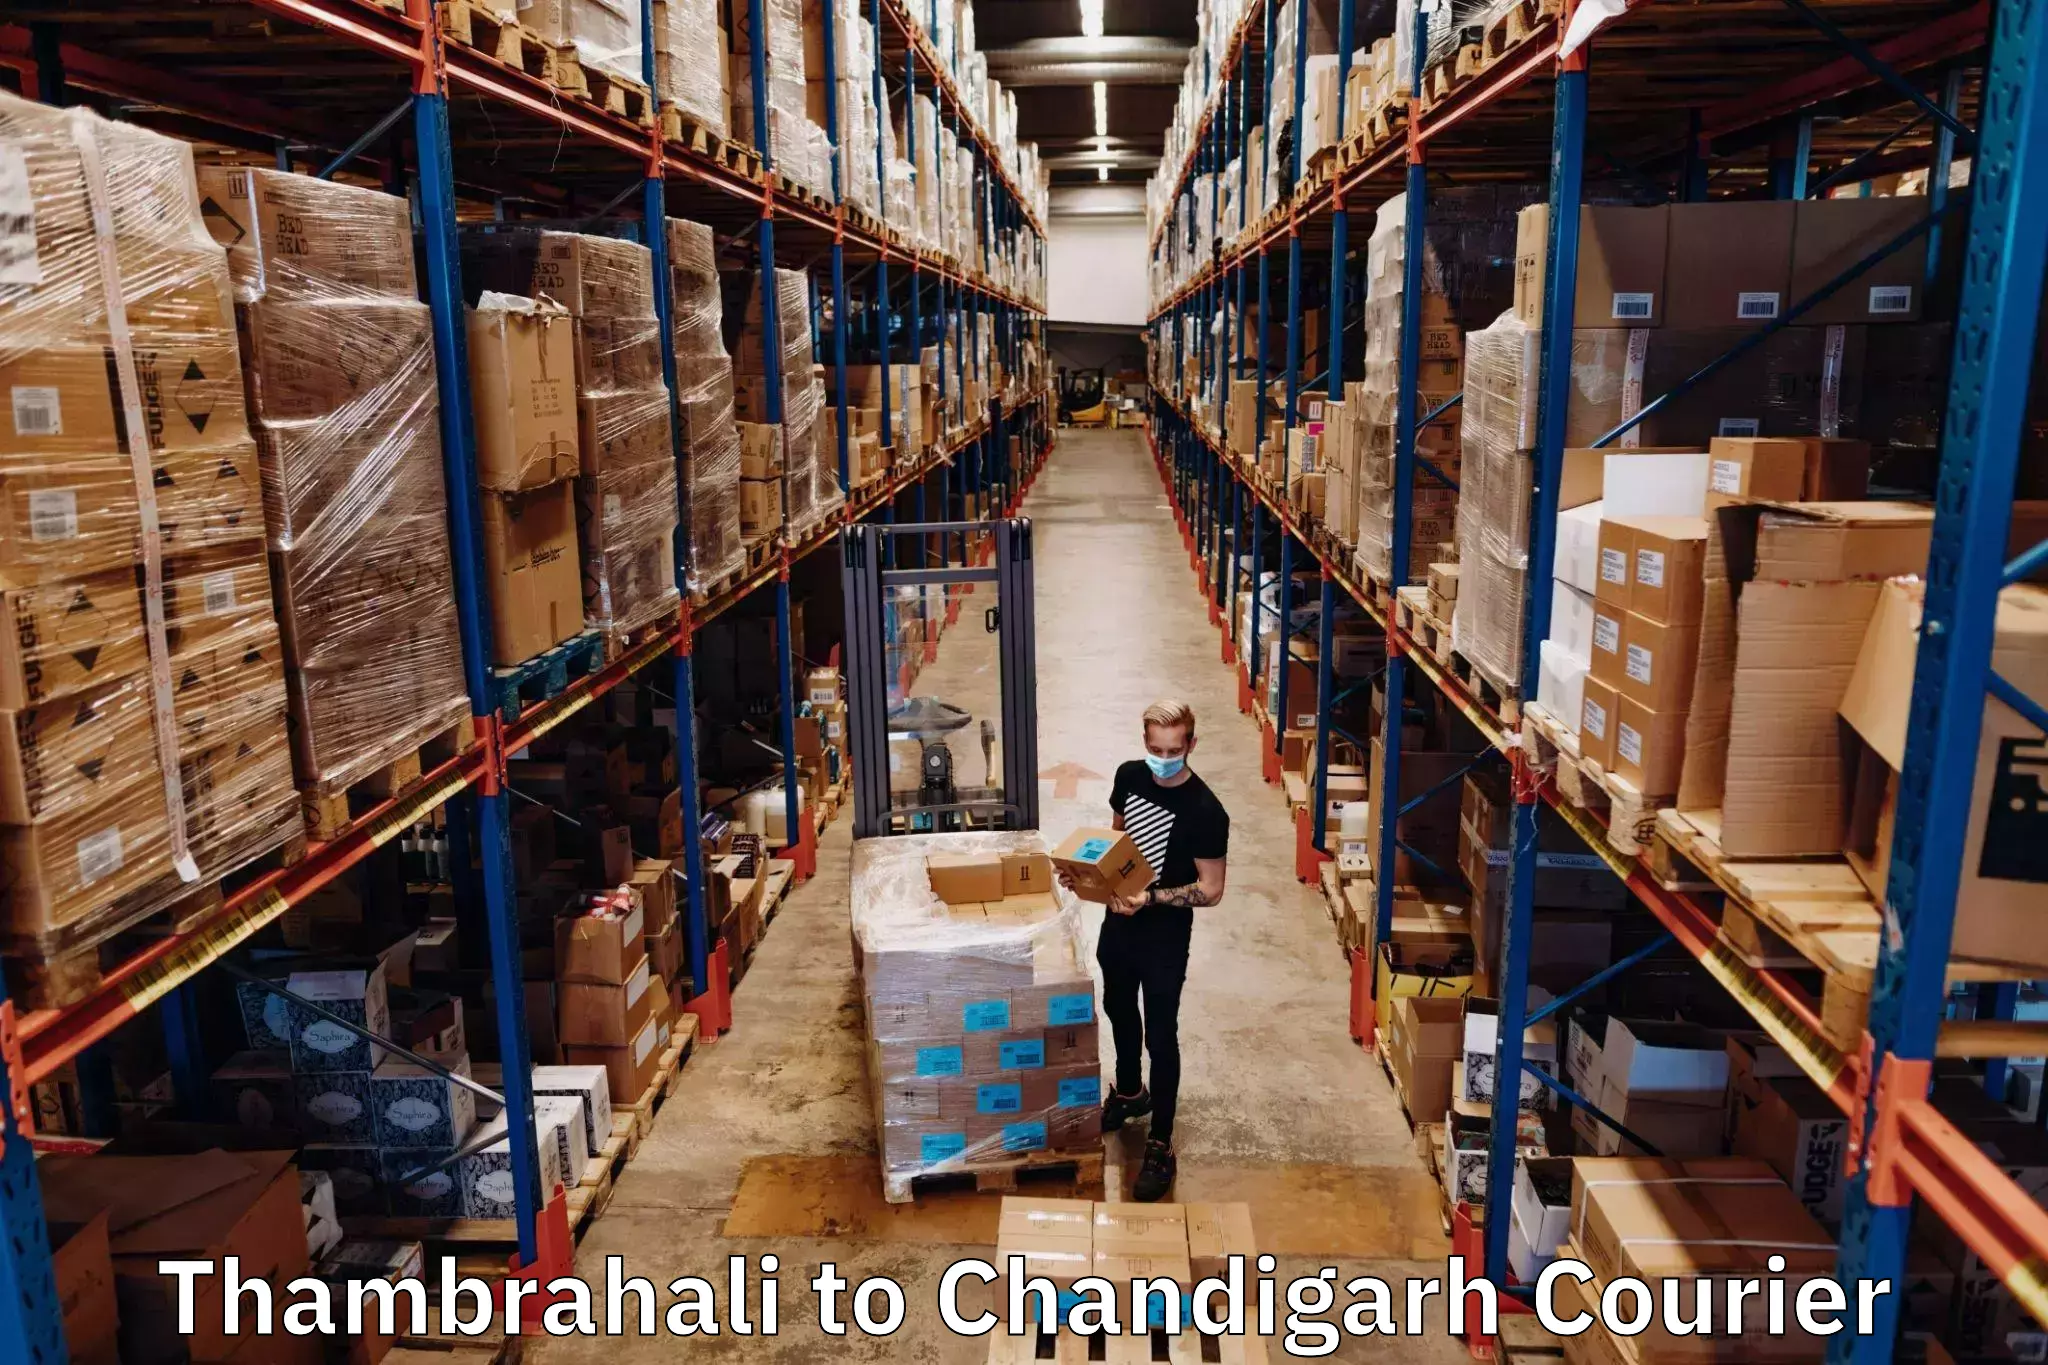 Premium courier solutions Thambrahali to Chandigarh